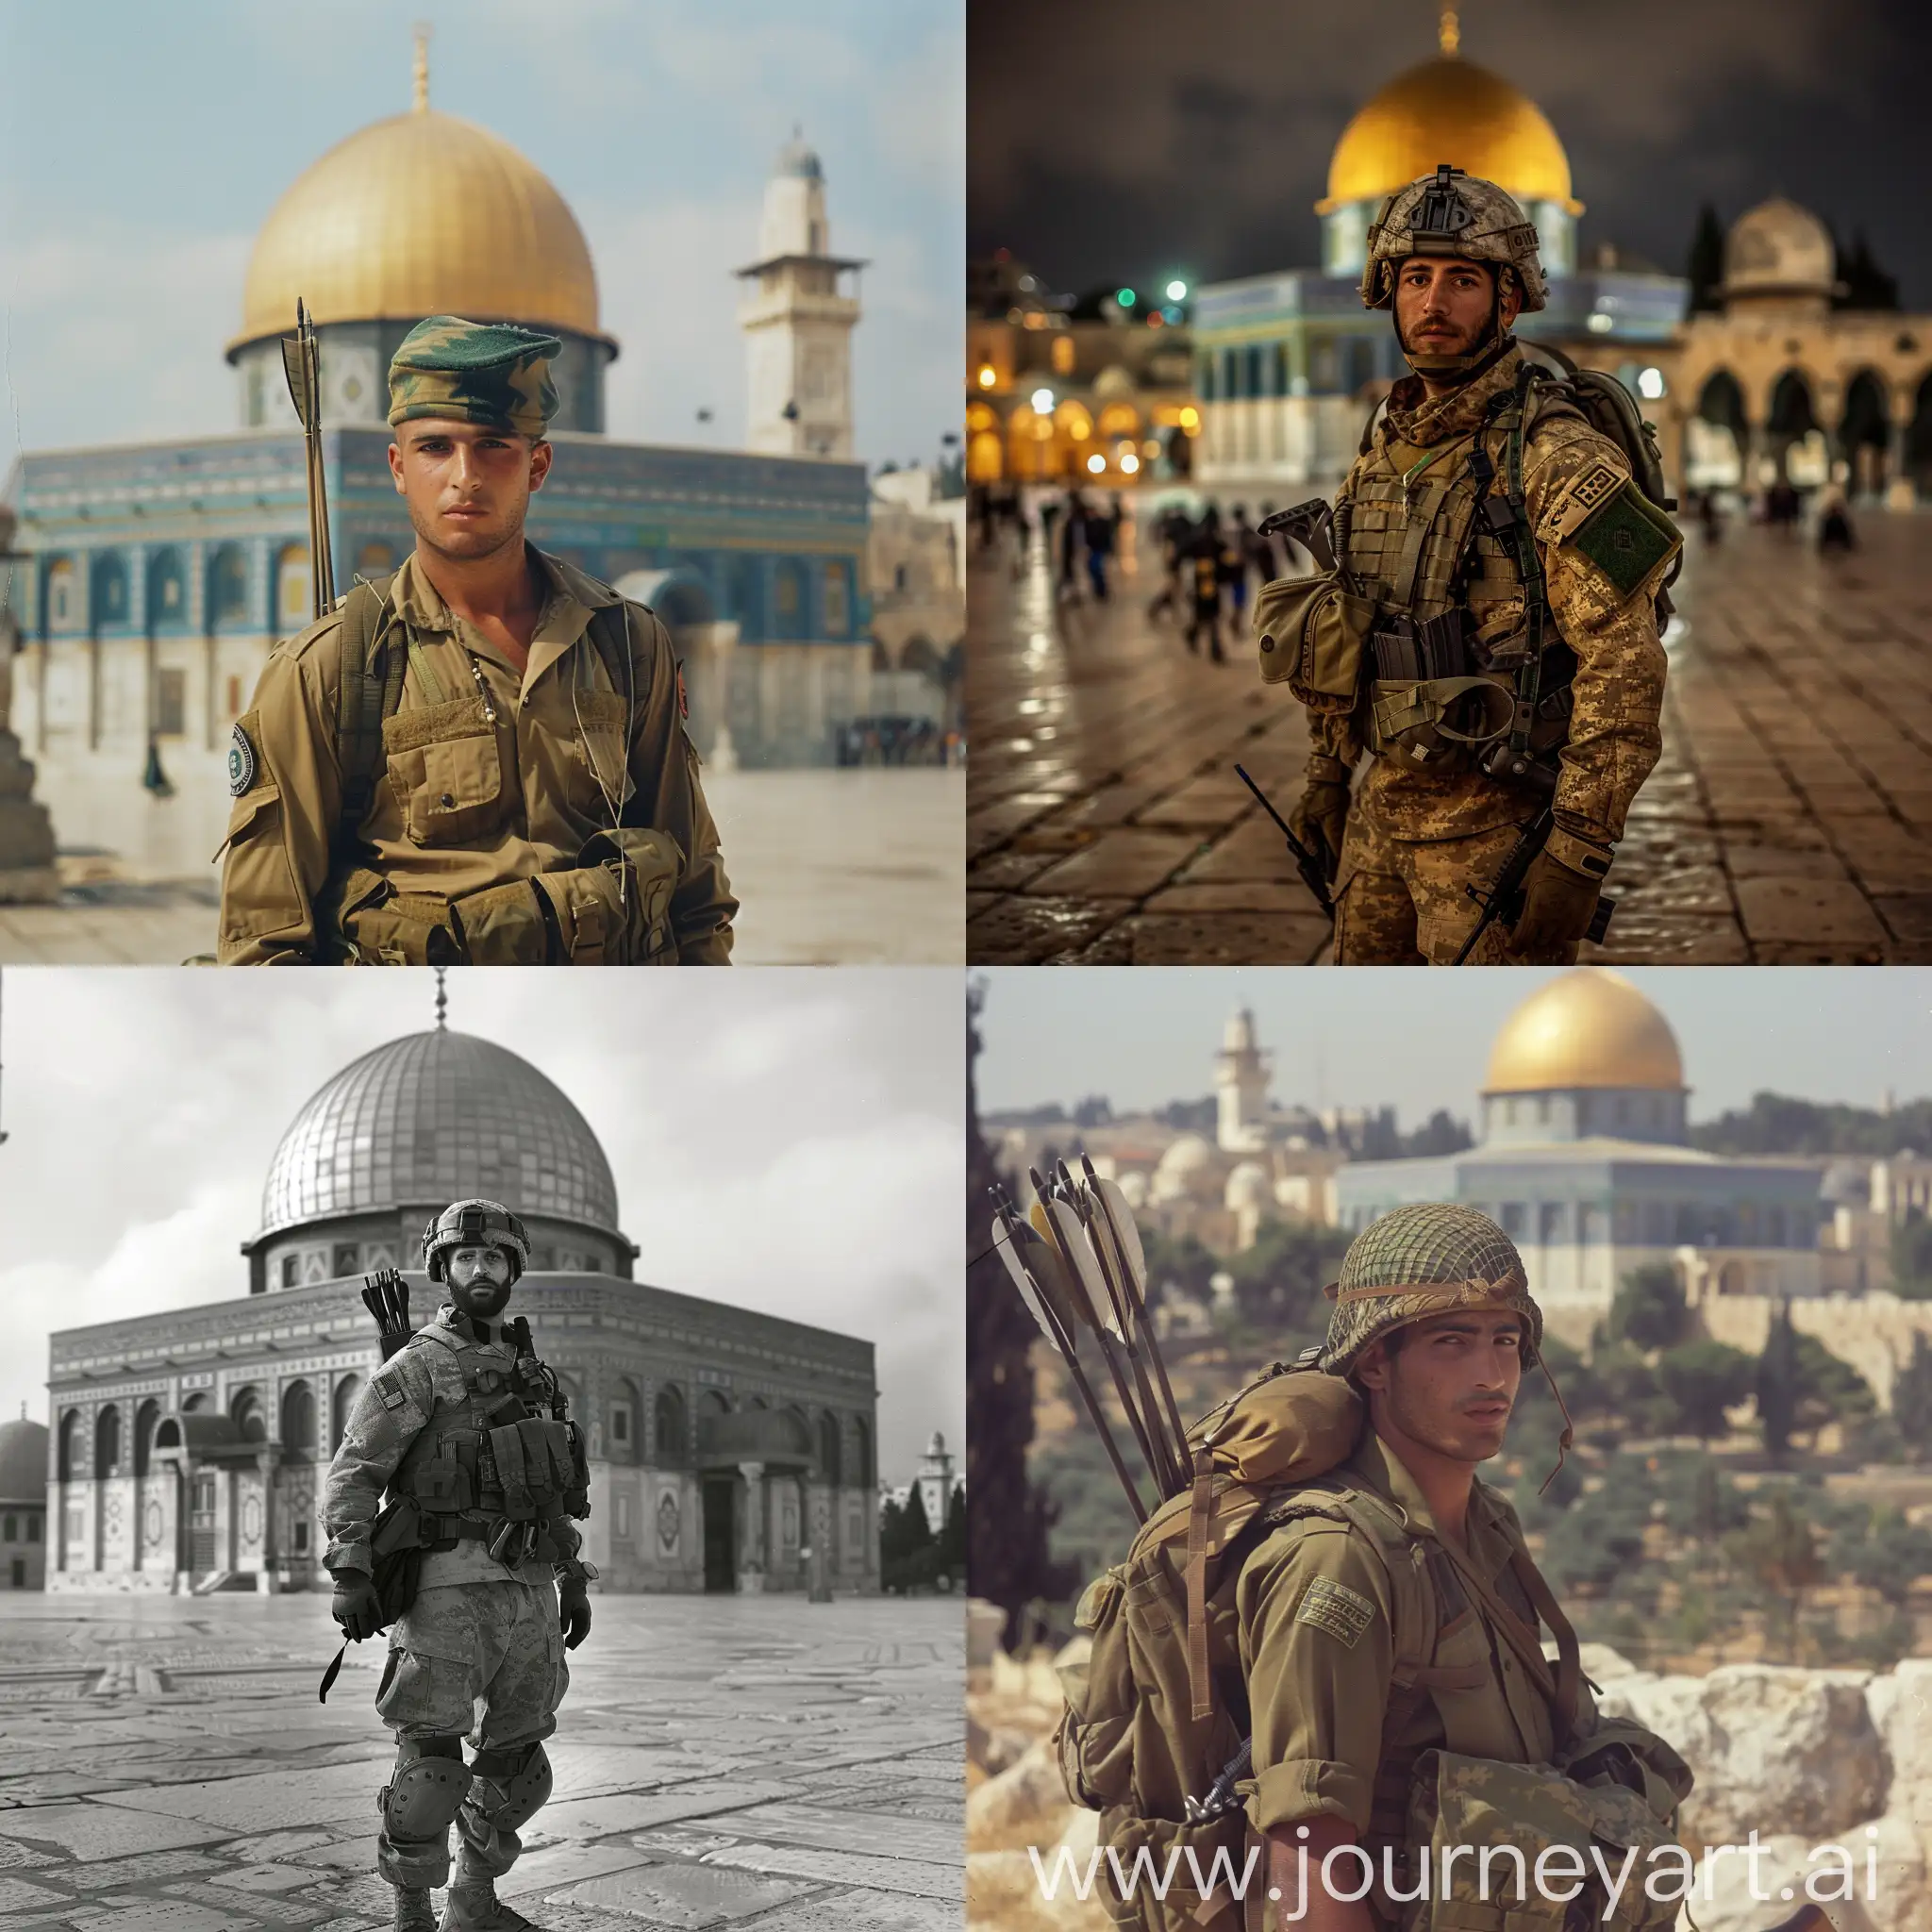 Palestinian-Soldier-with-Quiver-Standing-at-Dome-of-the-Rock-Mosque